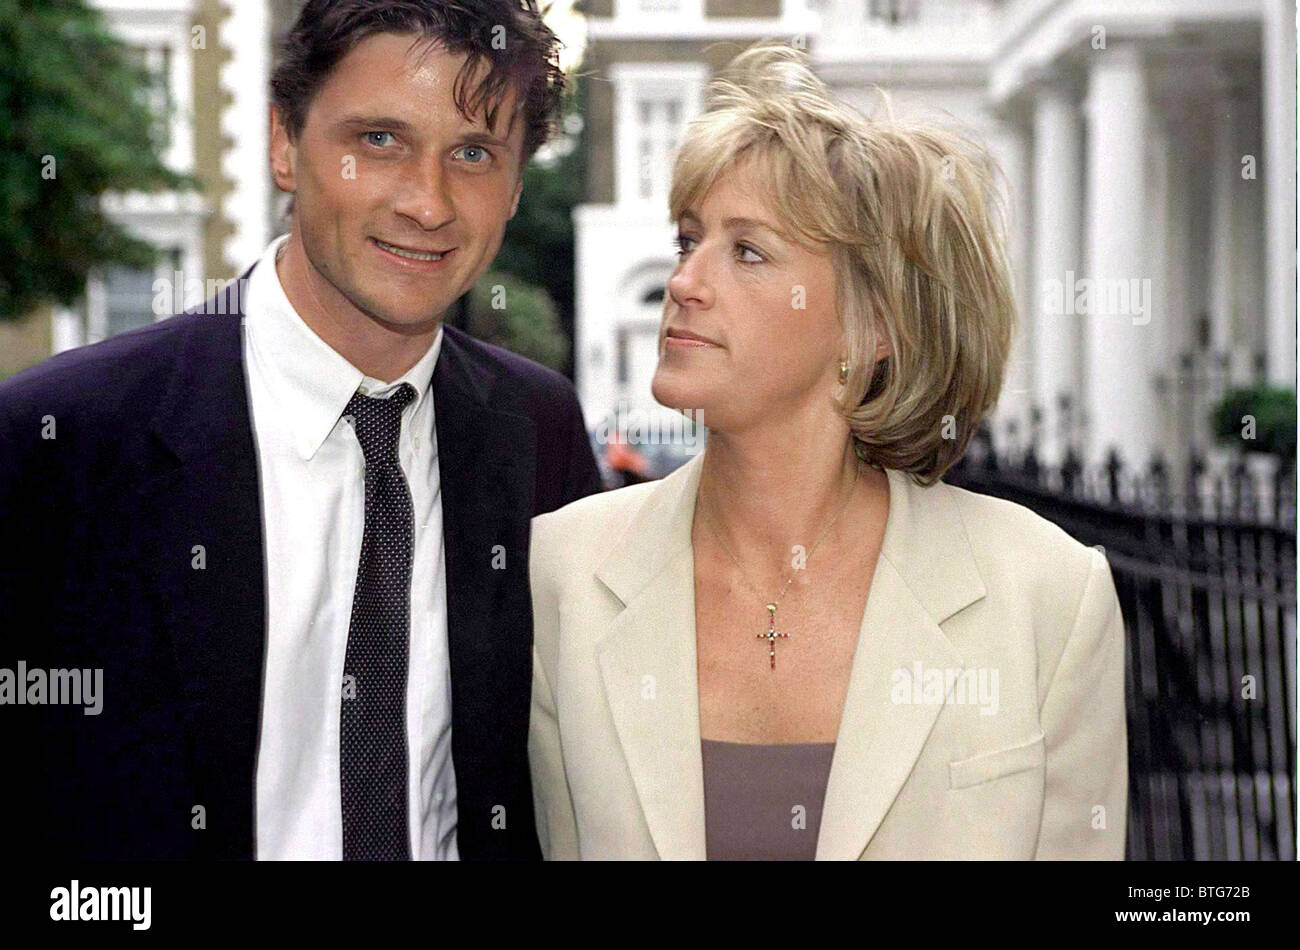 LADY COSIMA SOMERSET AND HER HUSBAND JOHNNY AT DAVID FROST'S SUMMER PARTY IN CARLYLE SQUARE, LONDON. Stock Photo